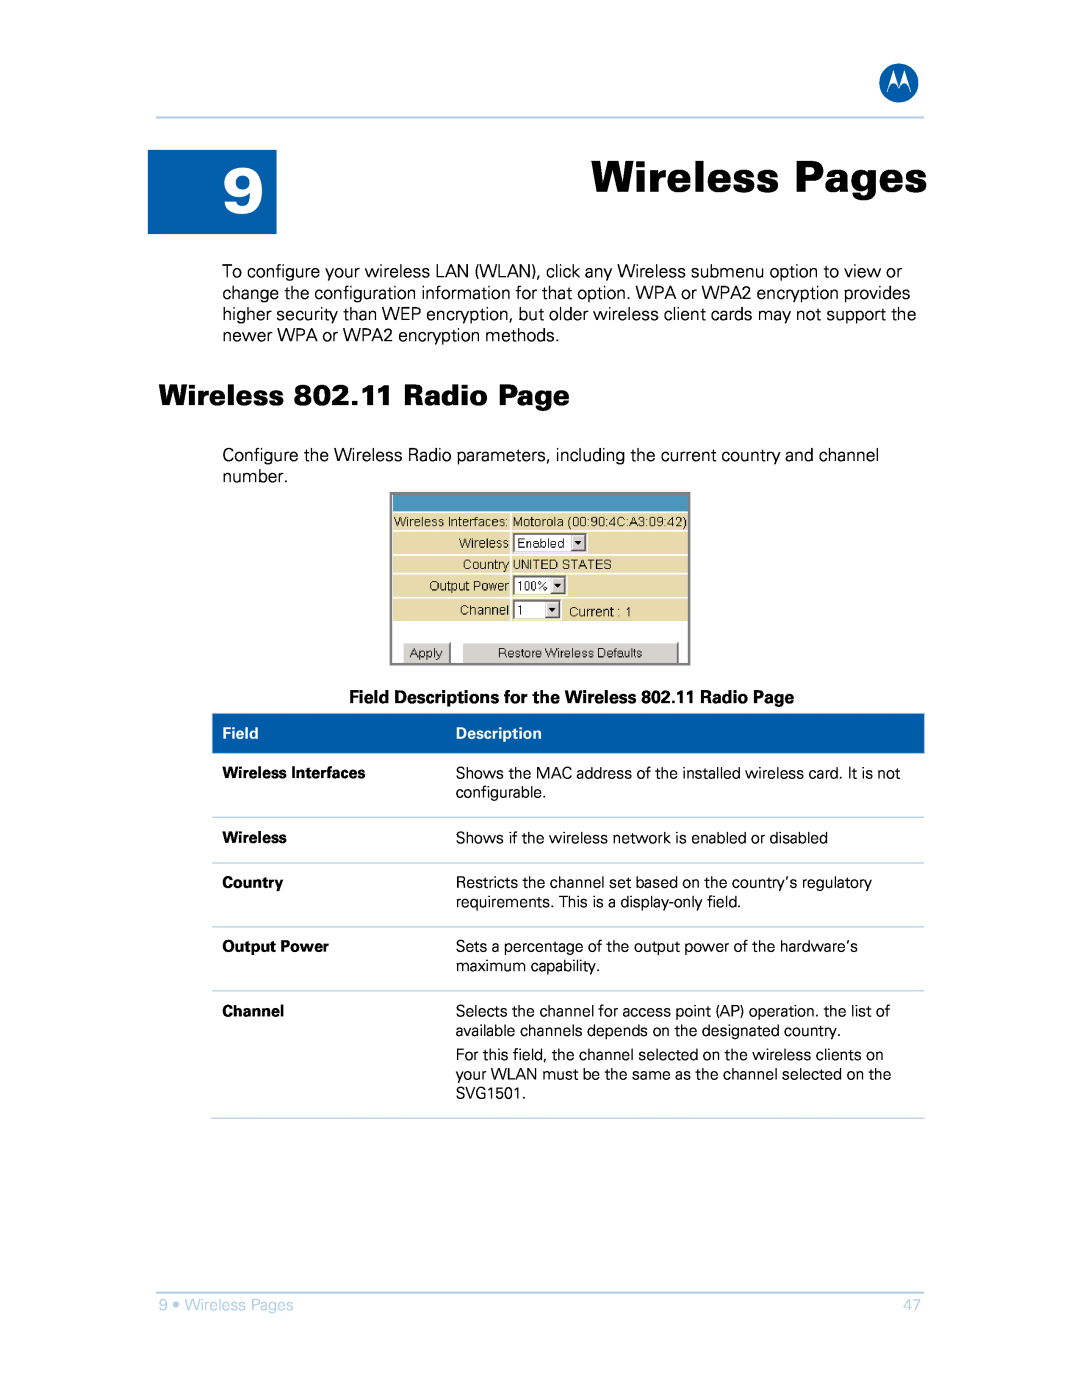 Motorola SVG1501E, SVG1501UE manual Wireless Pages, Field Descriptions for the Wireless 802.11 Radio Page 